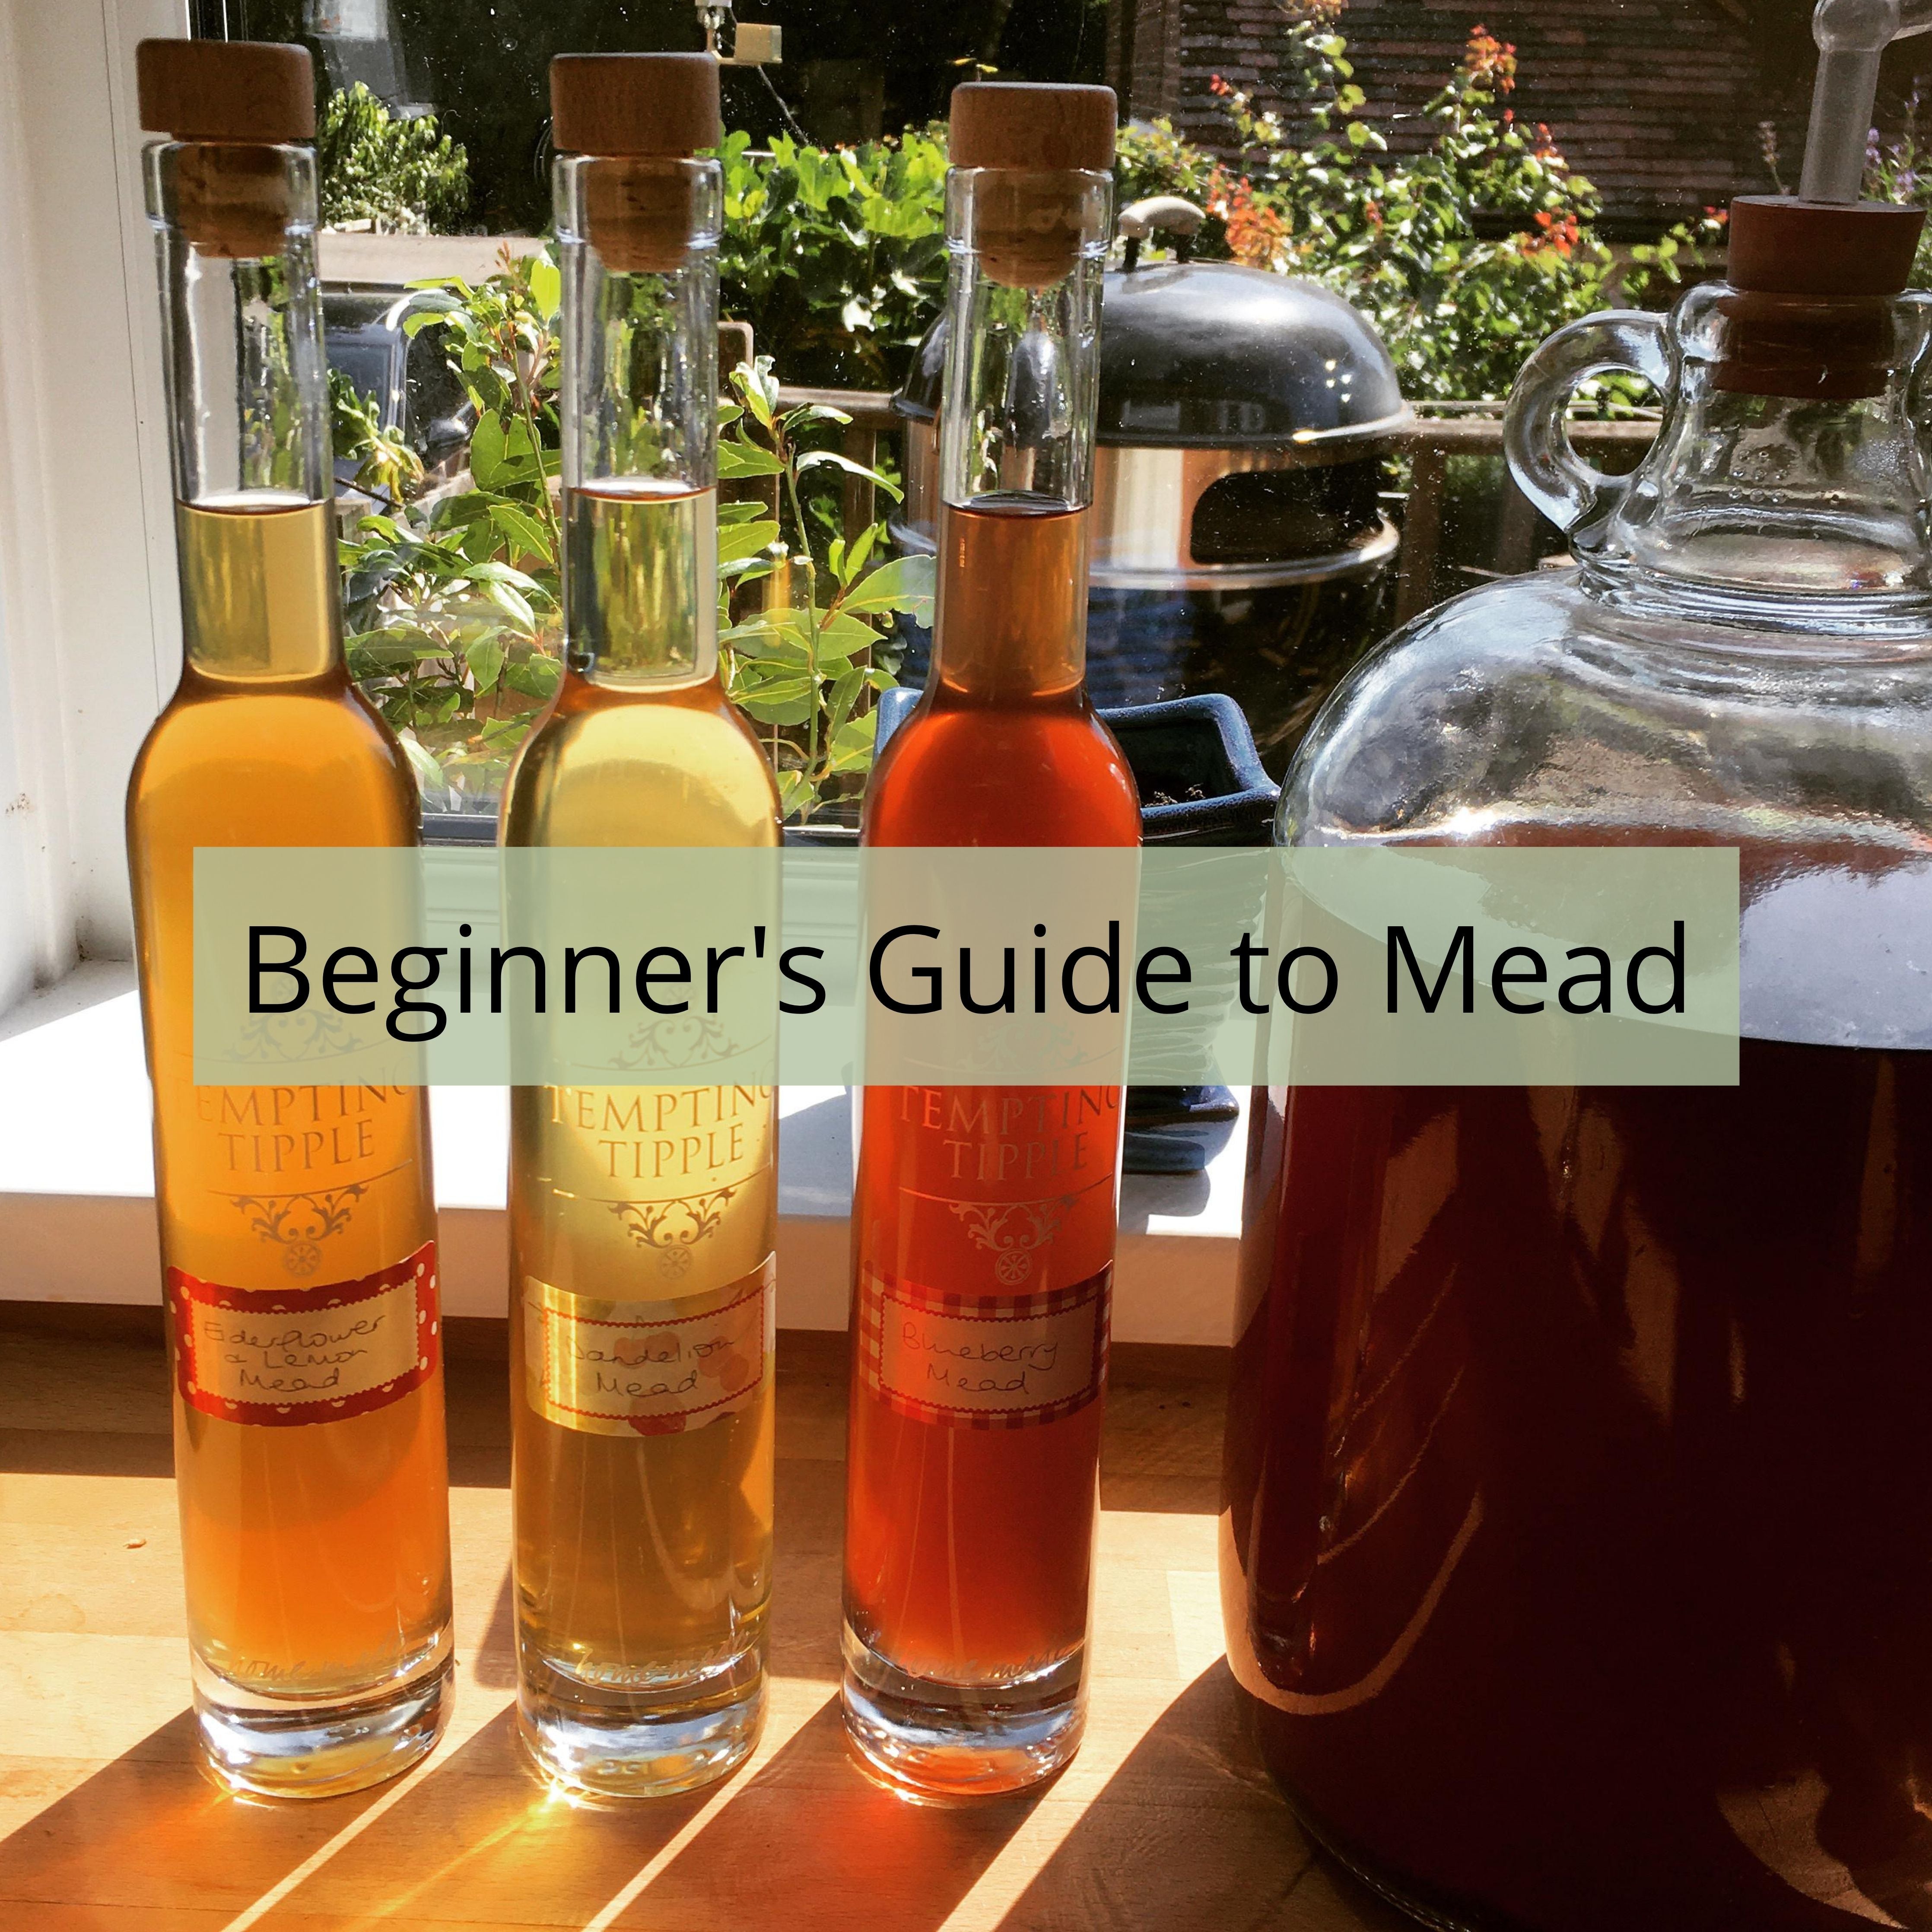 How to Make a Gallon of Mead: A Simple Mead Recipe